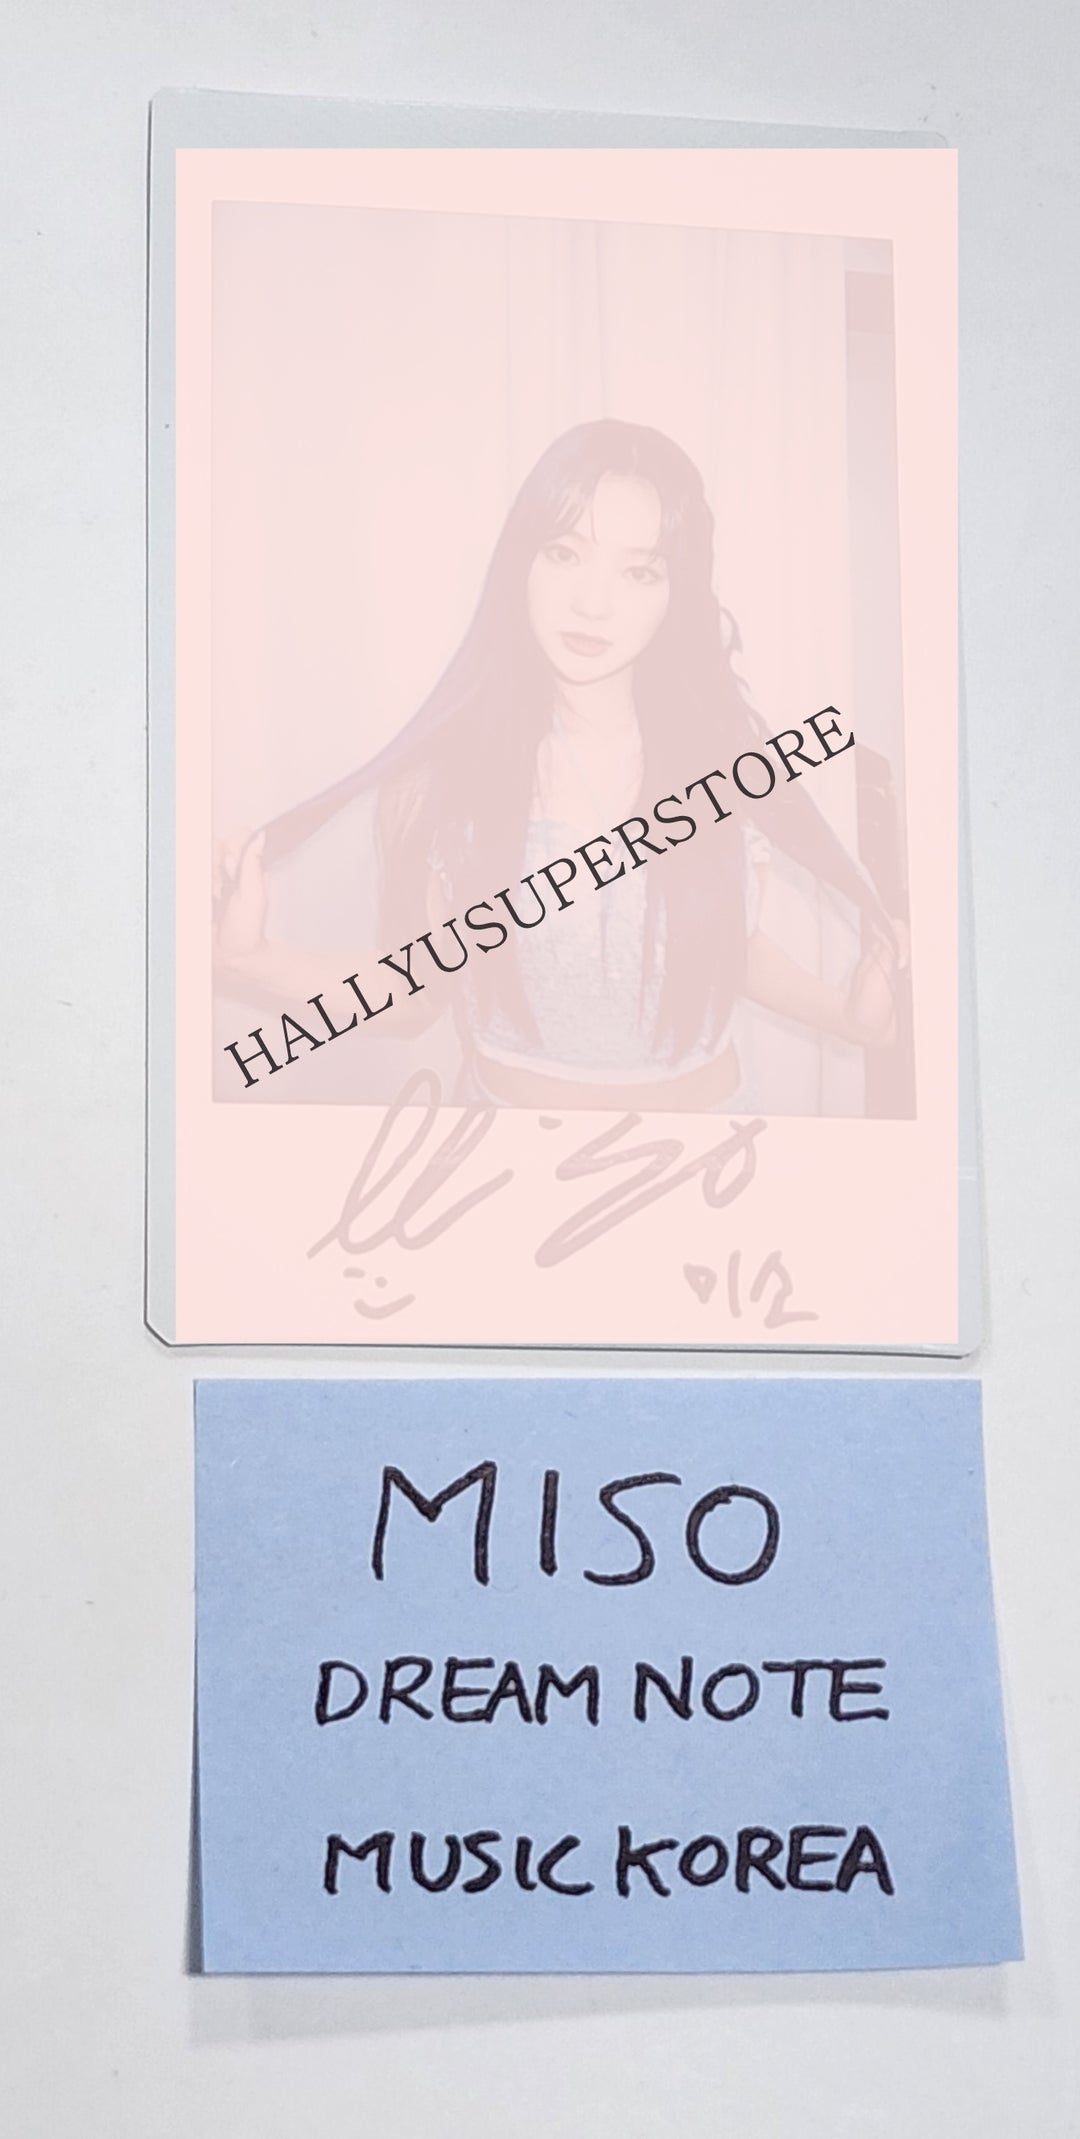 MISO (Of Dream Note) - Hand Autographed(Signed) Polaroid